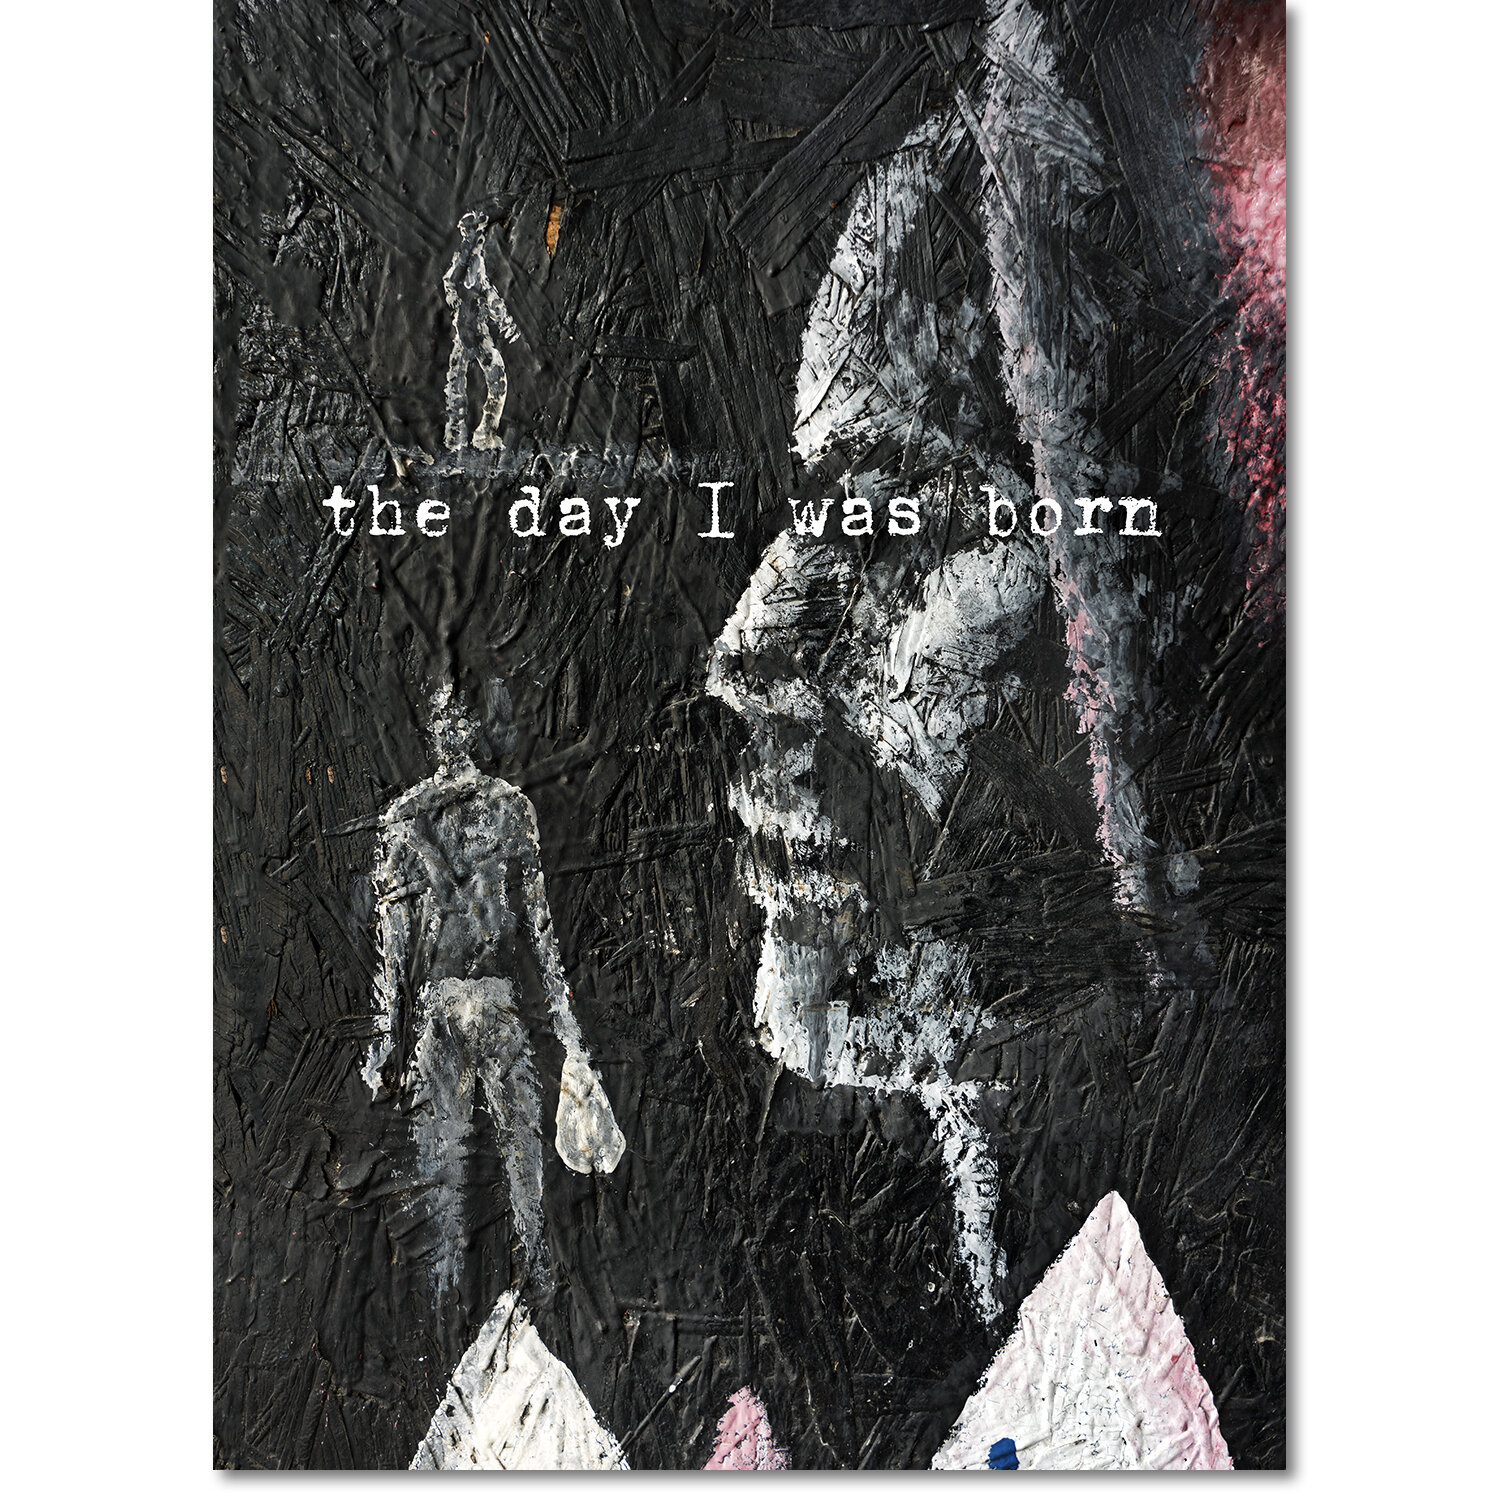   the day I was born  tells the stories of six men and women who are living out their lives in the memory-laden Mississippi Delta of Arkansas.  Many Voices Press, 2020    Buy Book     Buy Signed Book + Choice of 8.5x11 Print   